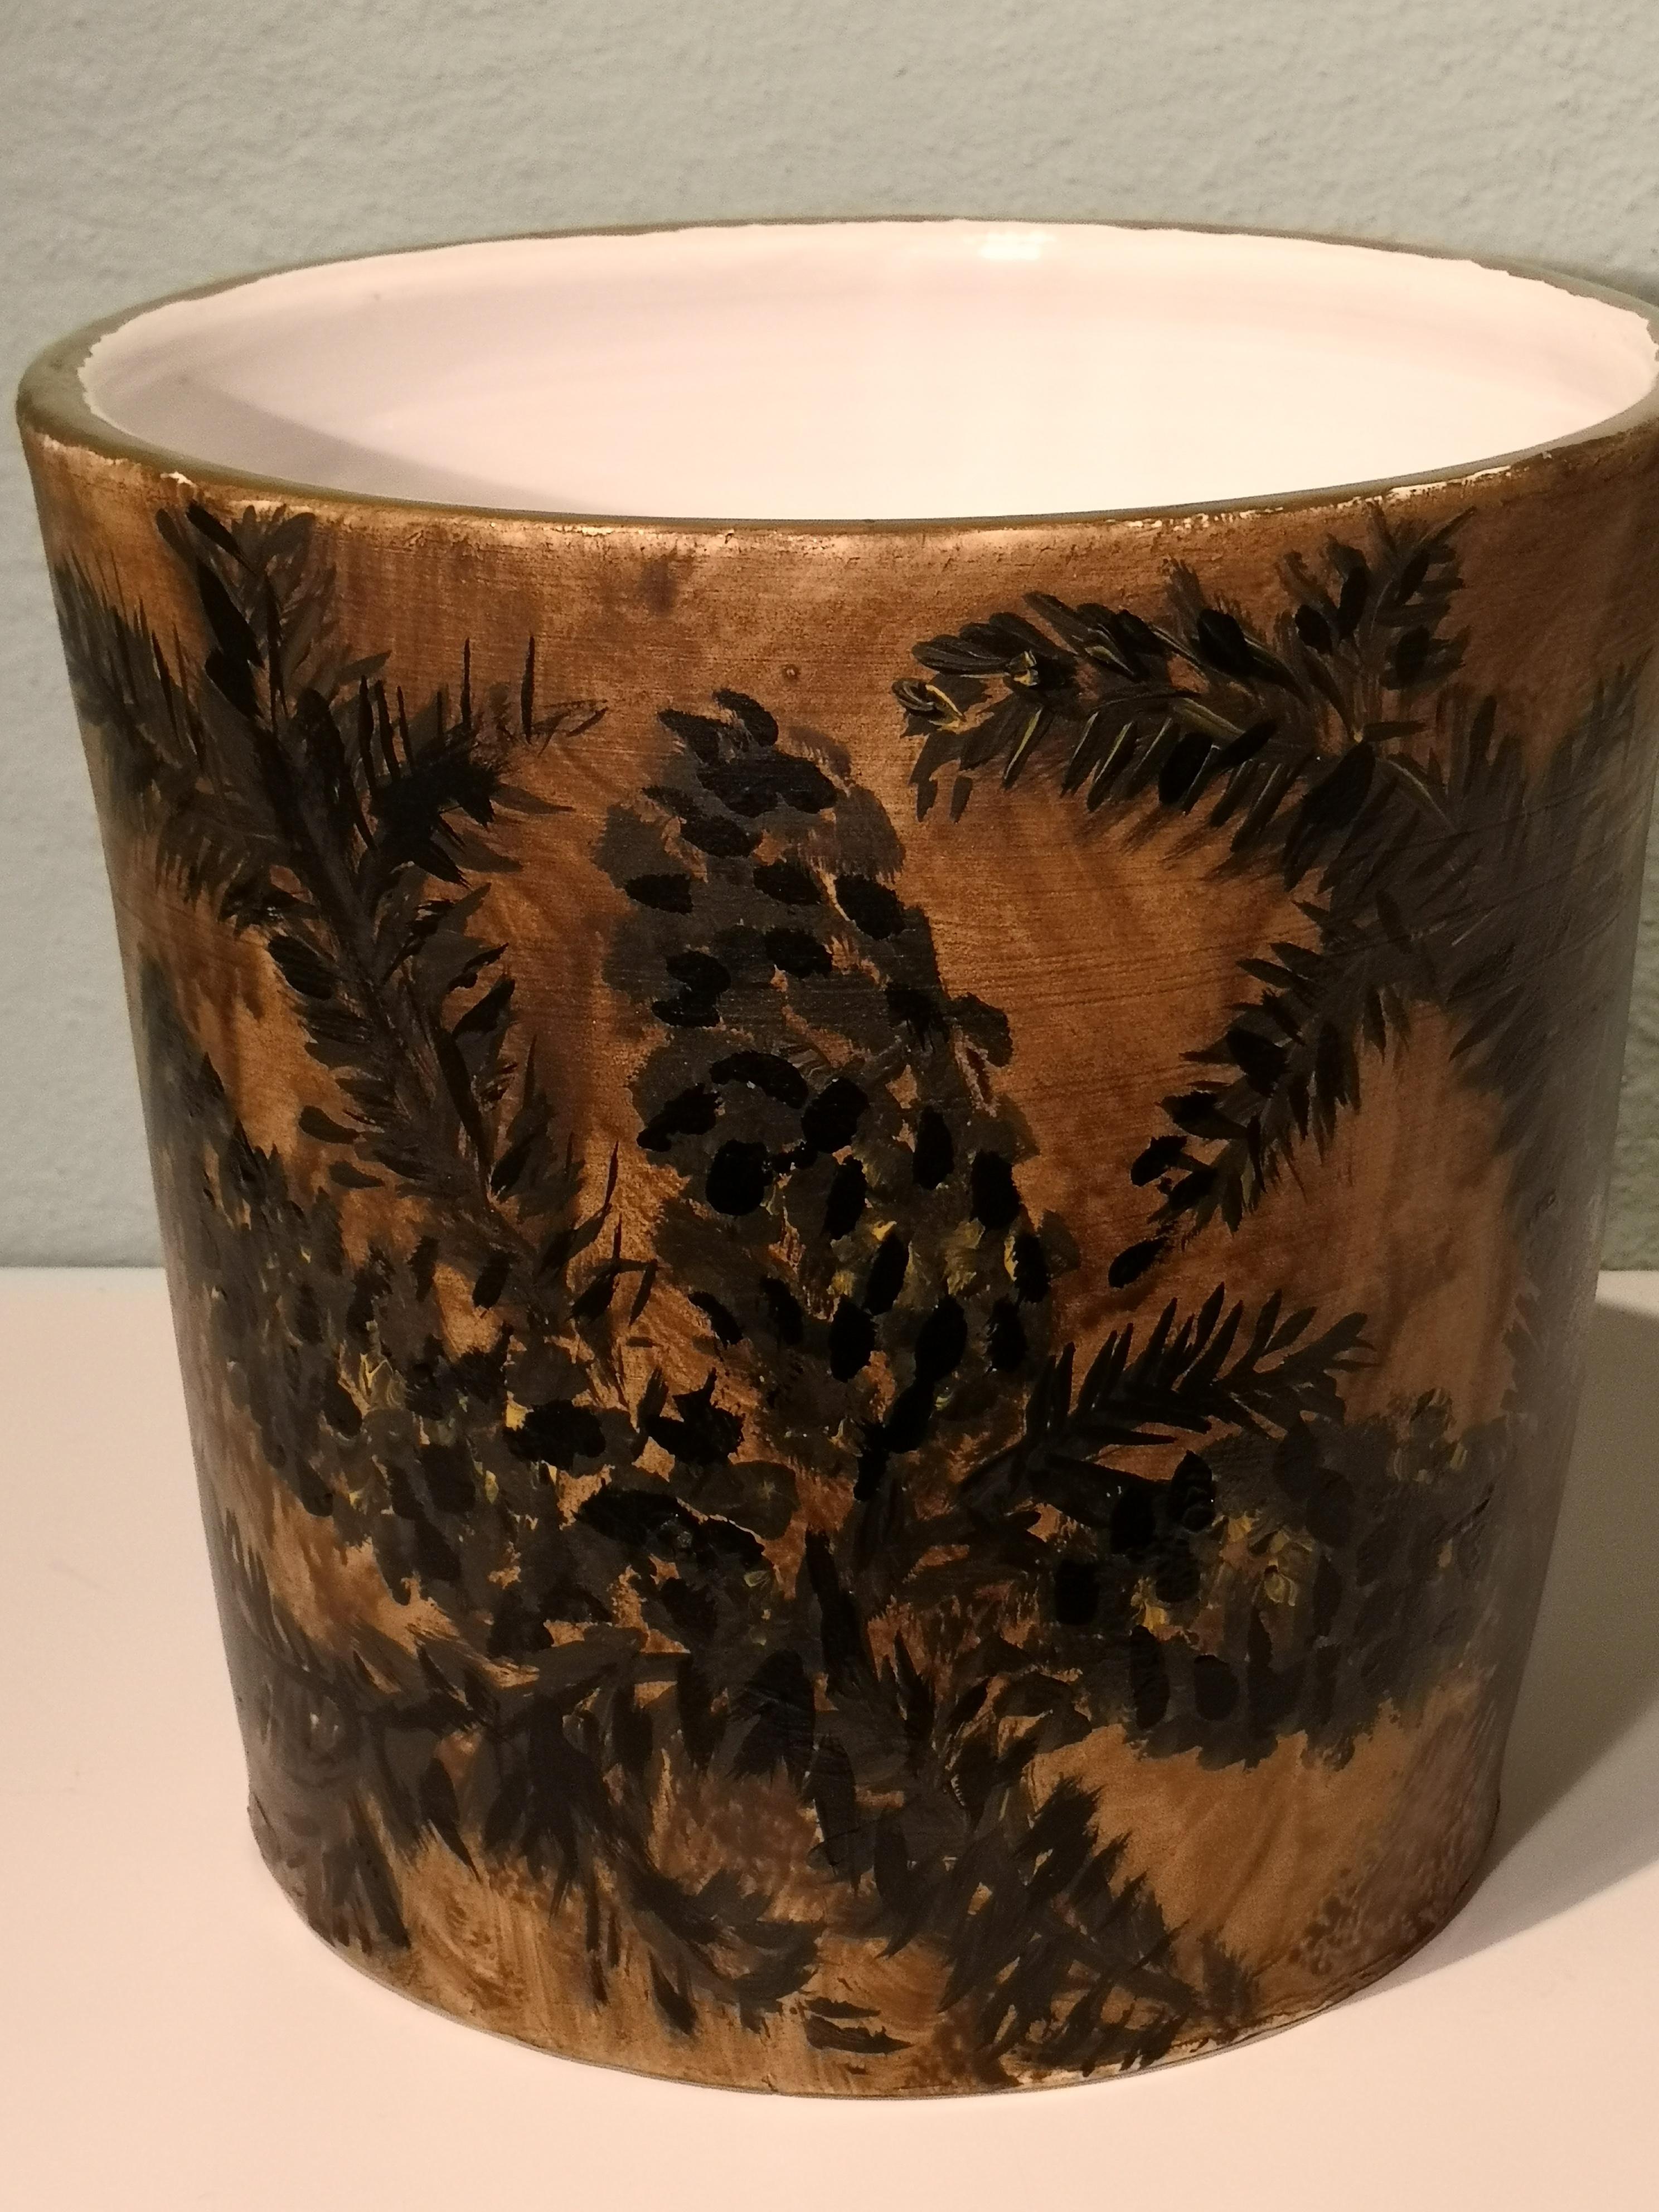 Completely handmade pottery vase in earthenware. Formed by hand in a strong straight form. Hands-free painted with a naturalistic pine decor in green and brown colors. Rimmed by hand with a gold line. Inside white glazed. In the bottom signed by the